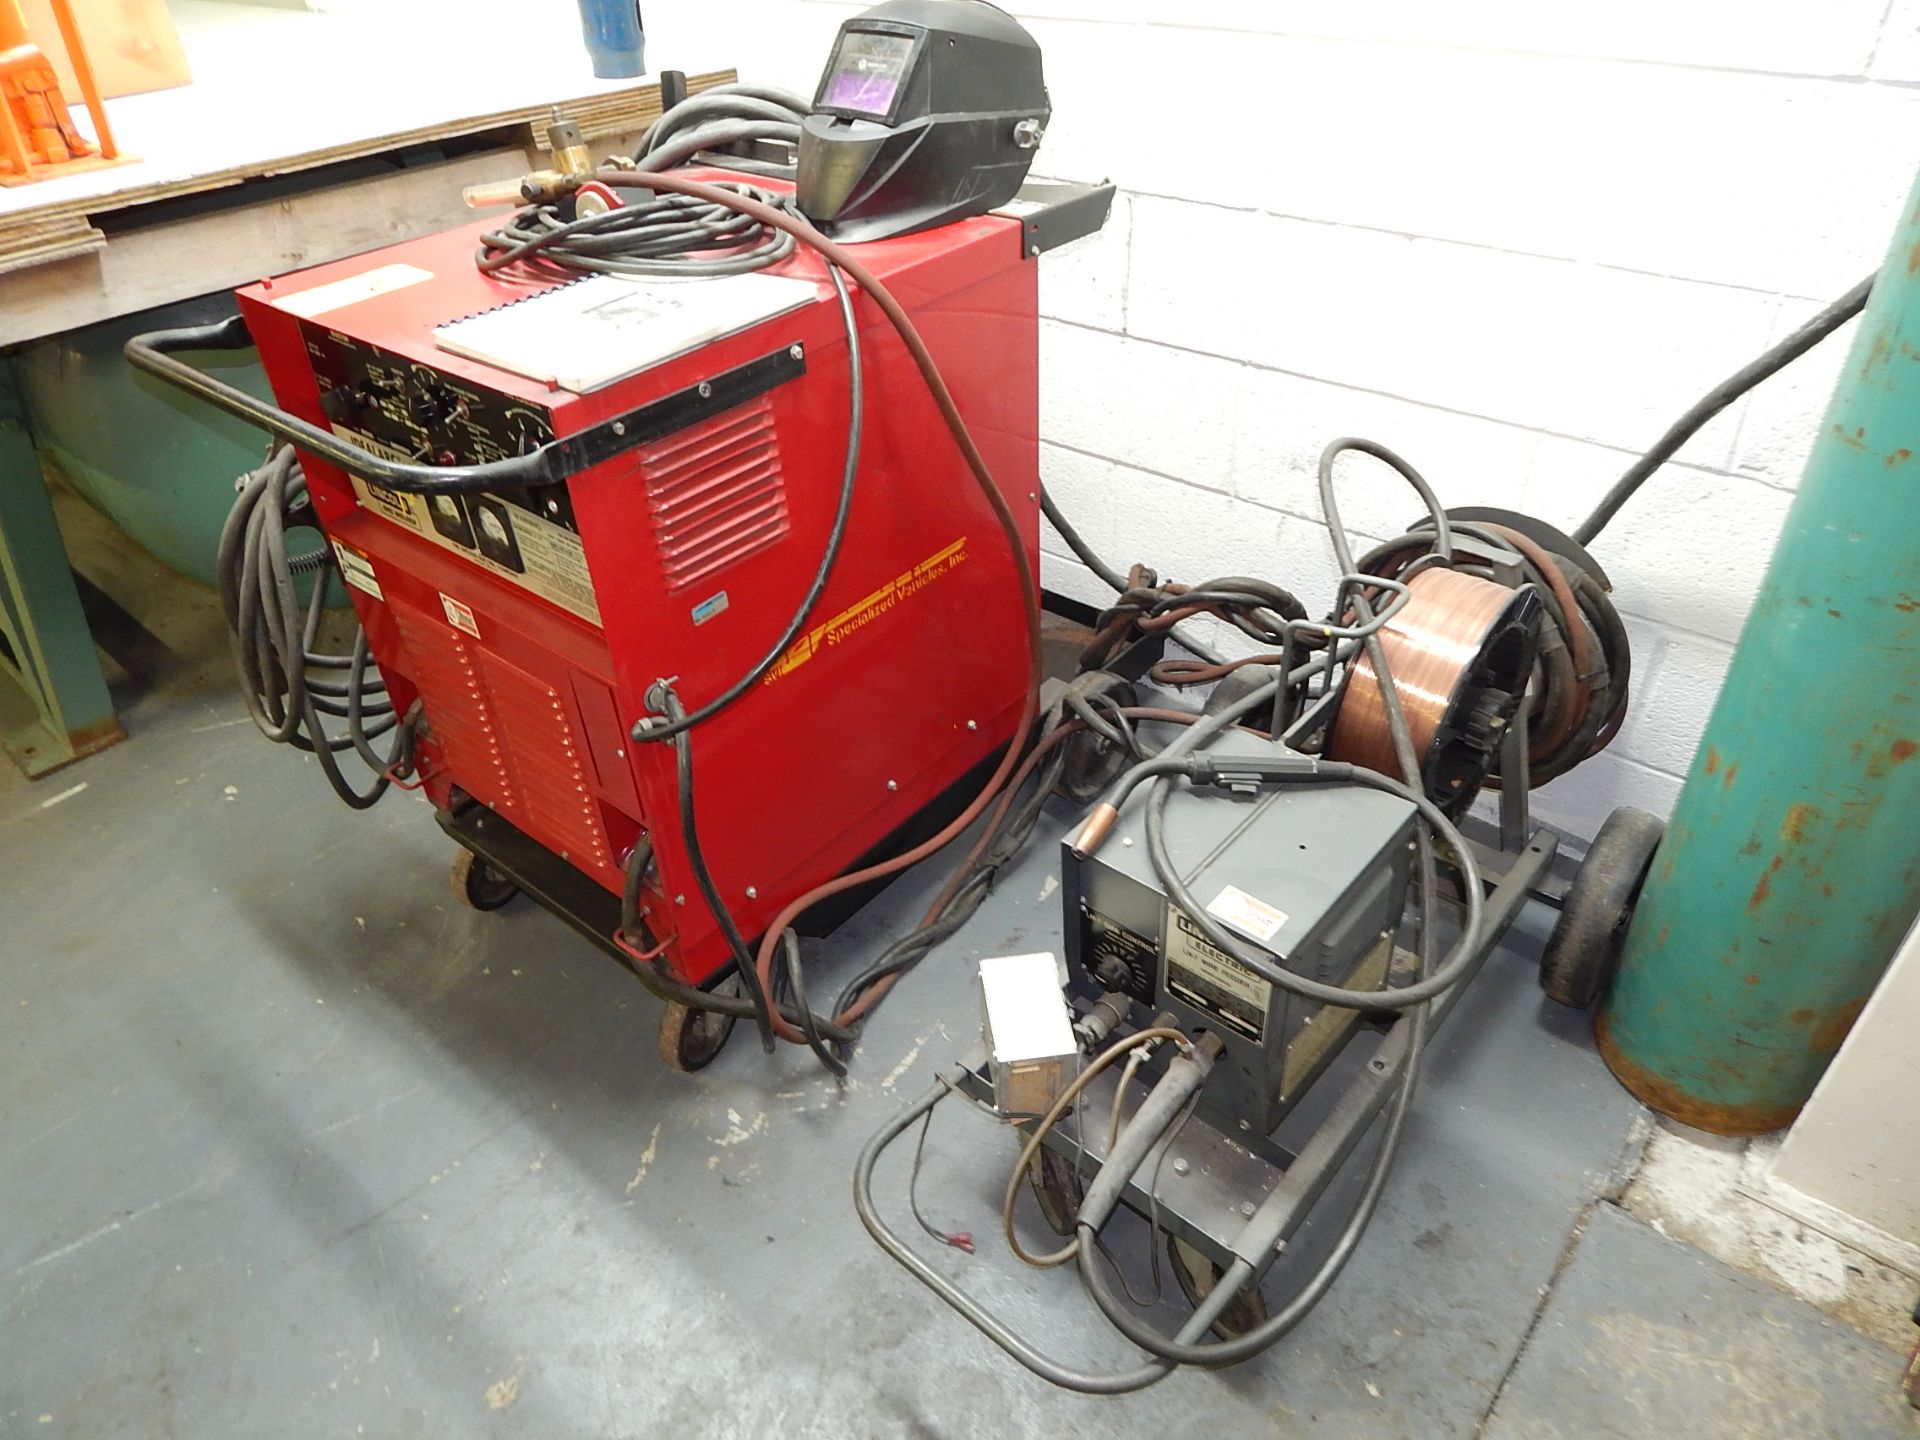 Lincoln Idealarc R3S-325 Mig Welder, s/n AC679812, with Lincoln LN-7 Wire Feeder and Mig Gun - Image 4 of 5